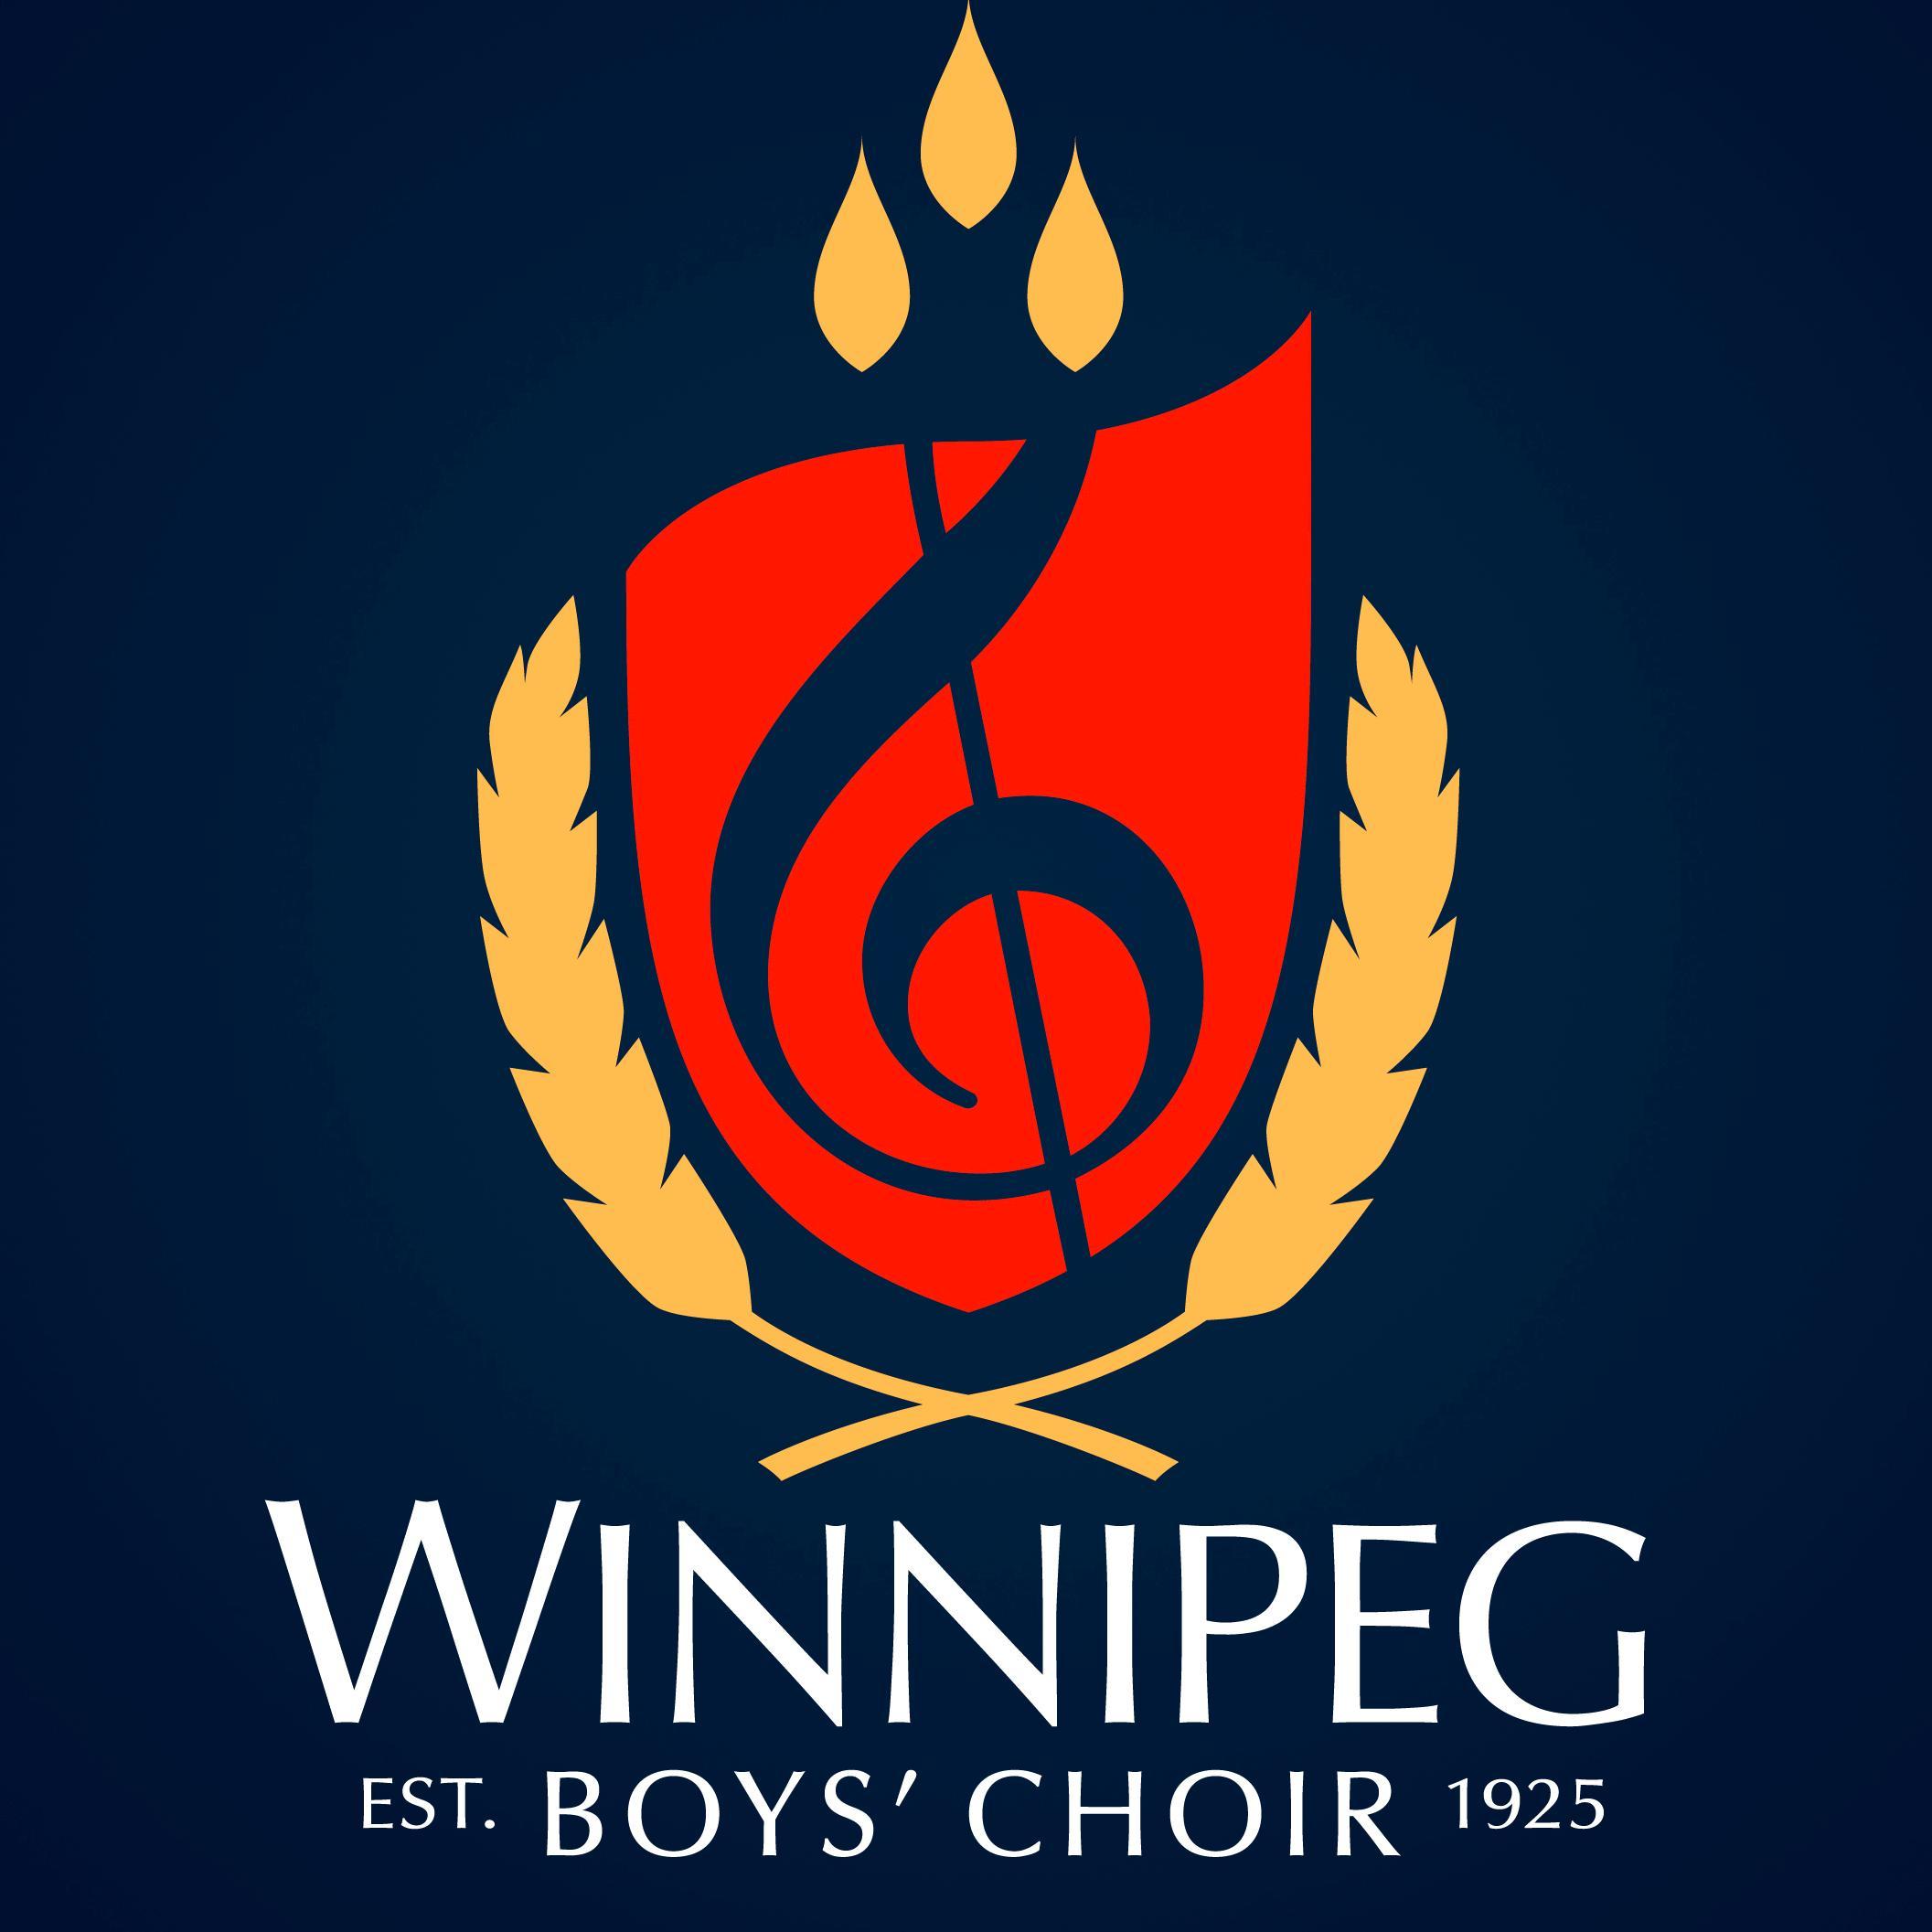 Since 1925, an auditioned choir developing boys' and young men's best voices and performing quality choral music with excellence.